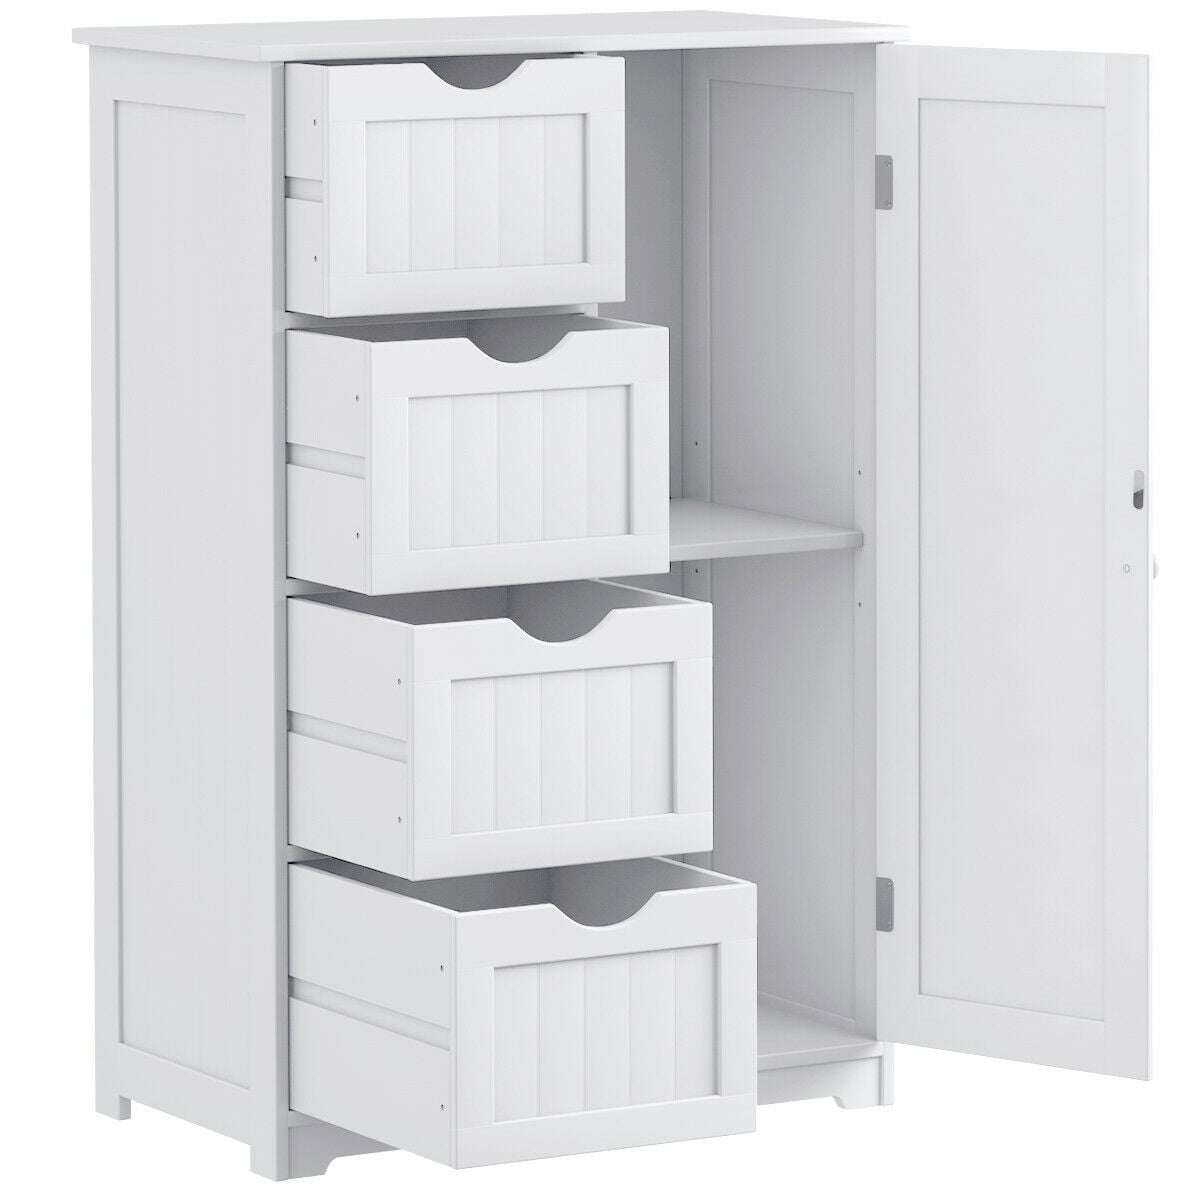 Bathroom Kitchen Office Wall Cabinet Collection Floating Cabinet 2-Door Wall Cabinet Gray FCH Storage Cabinet